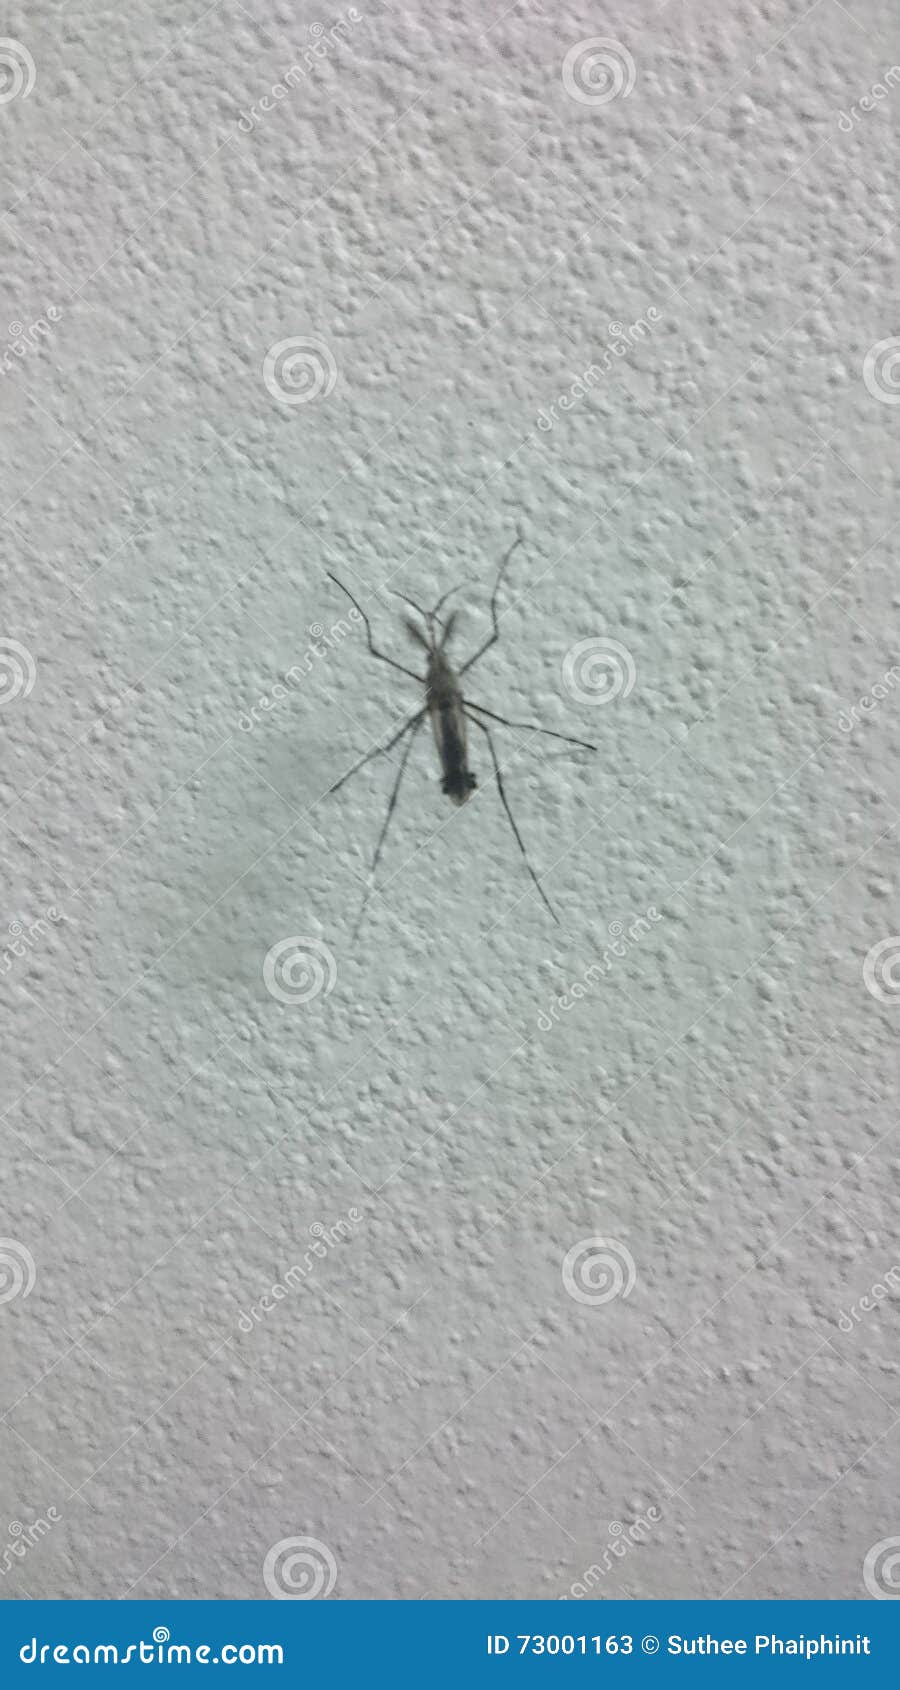 Mosquito on the wall stock image. Image of wall, dengue - 73001163